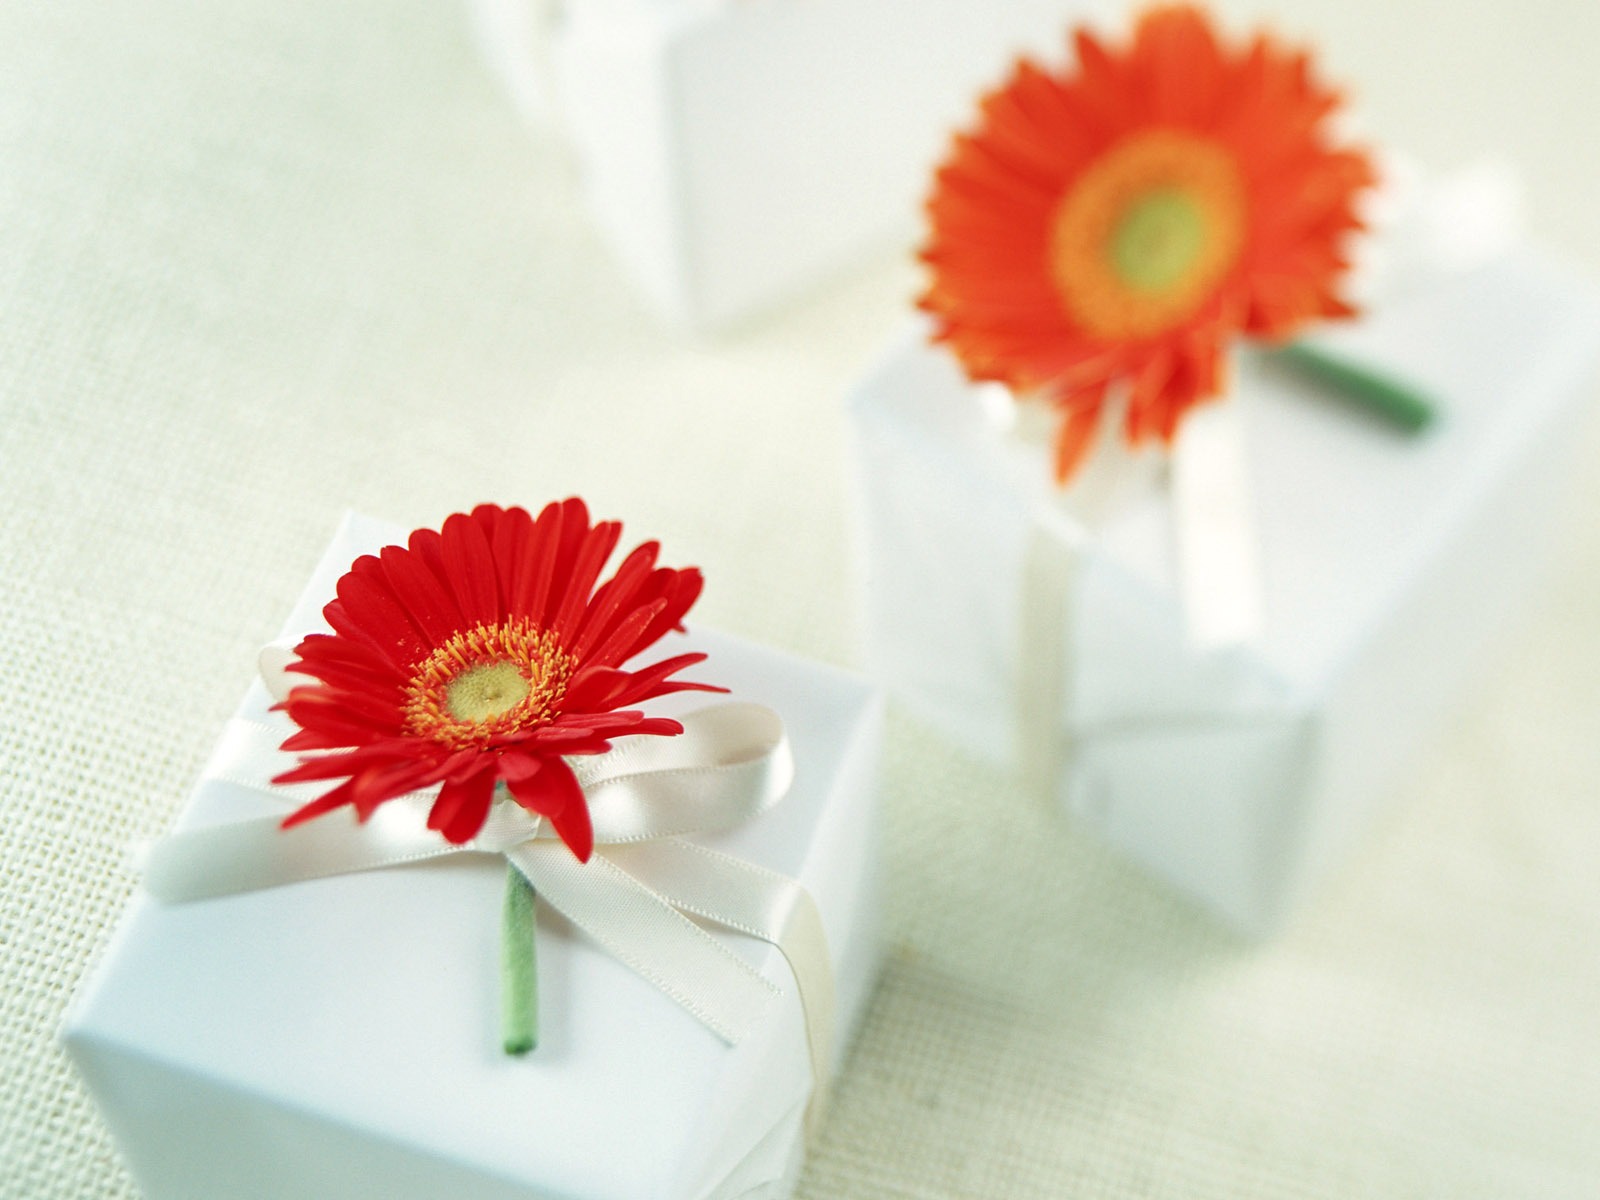 Flowers and gifts wallpaper (1) #18 - 1600x1200